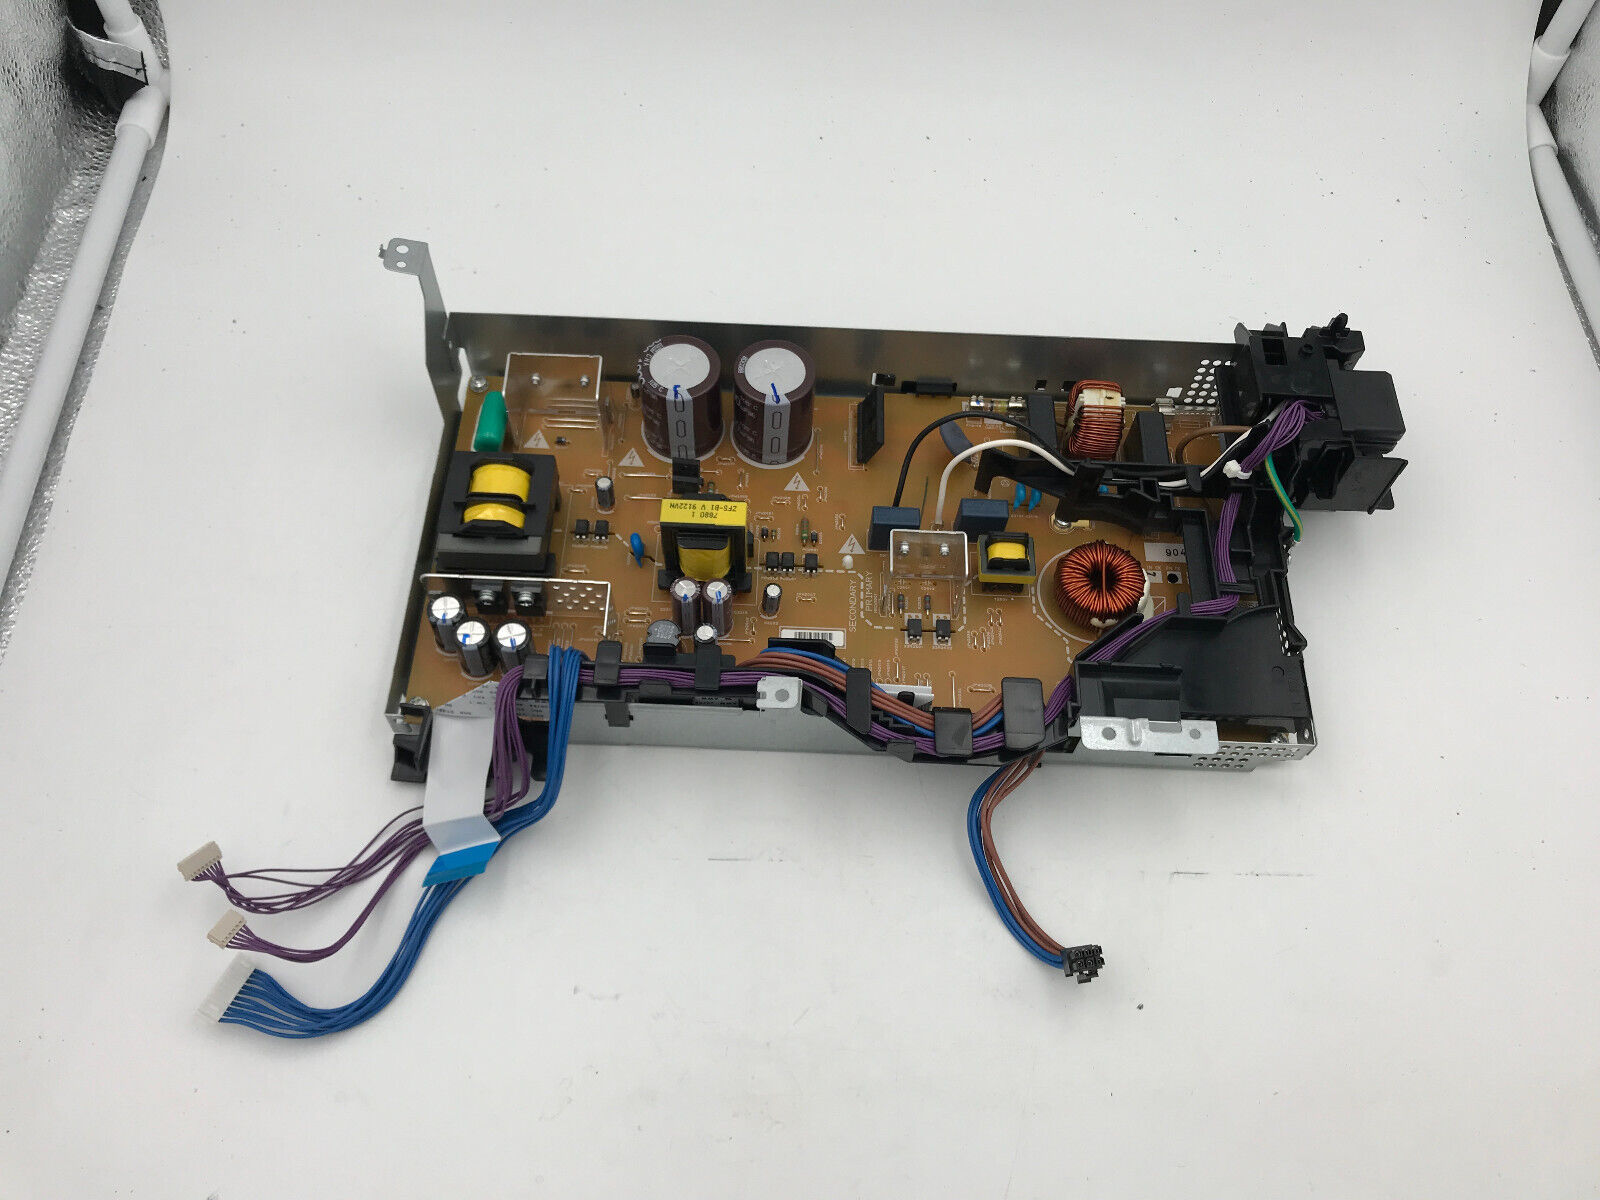 OEM RM2-1318, RM2-9332 Low Voltage Power Supply for HP LaserJet M631, M632, M633